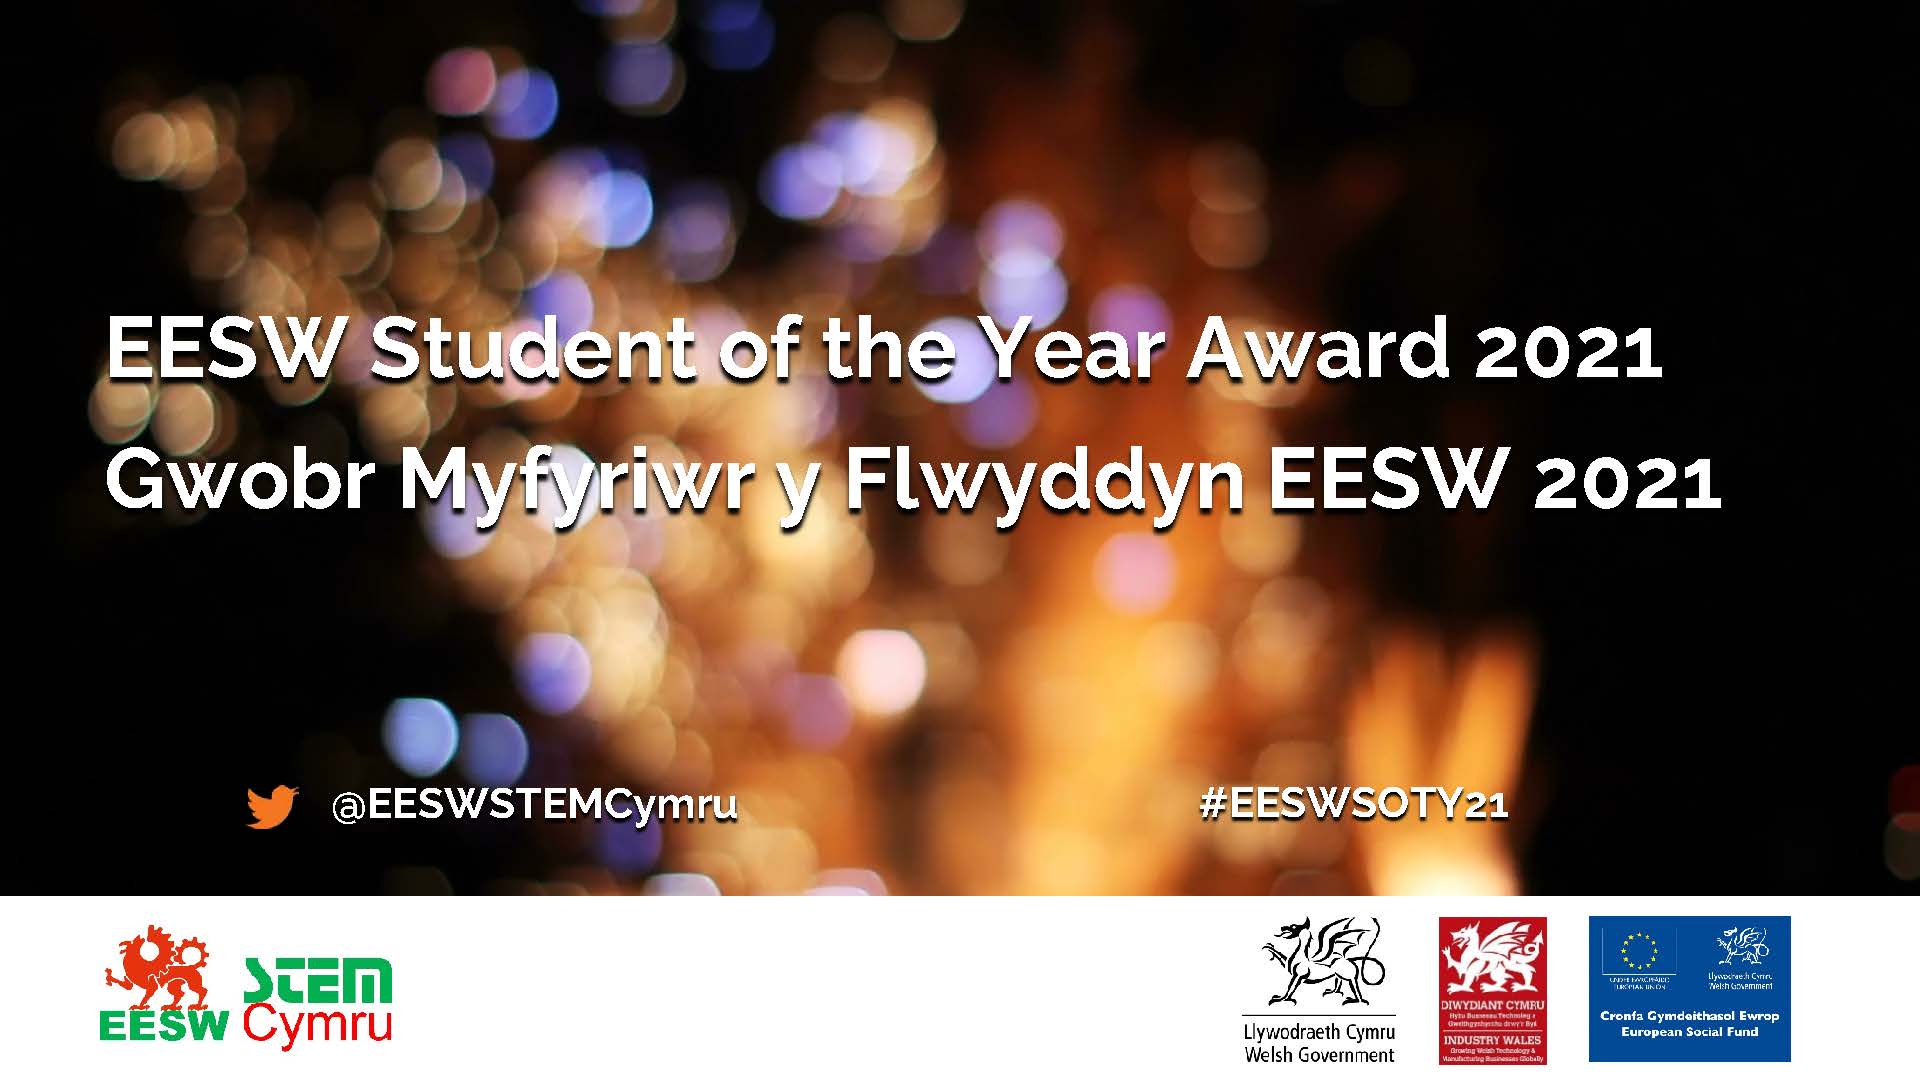 EESW Student of the Year Award 2021